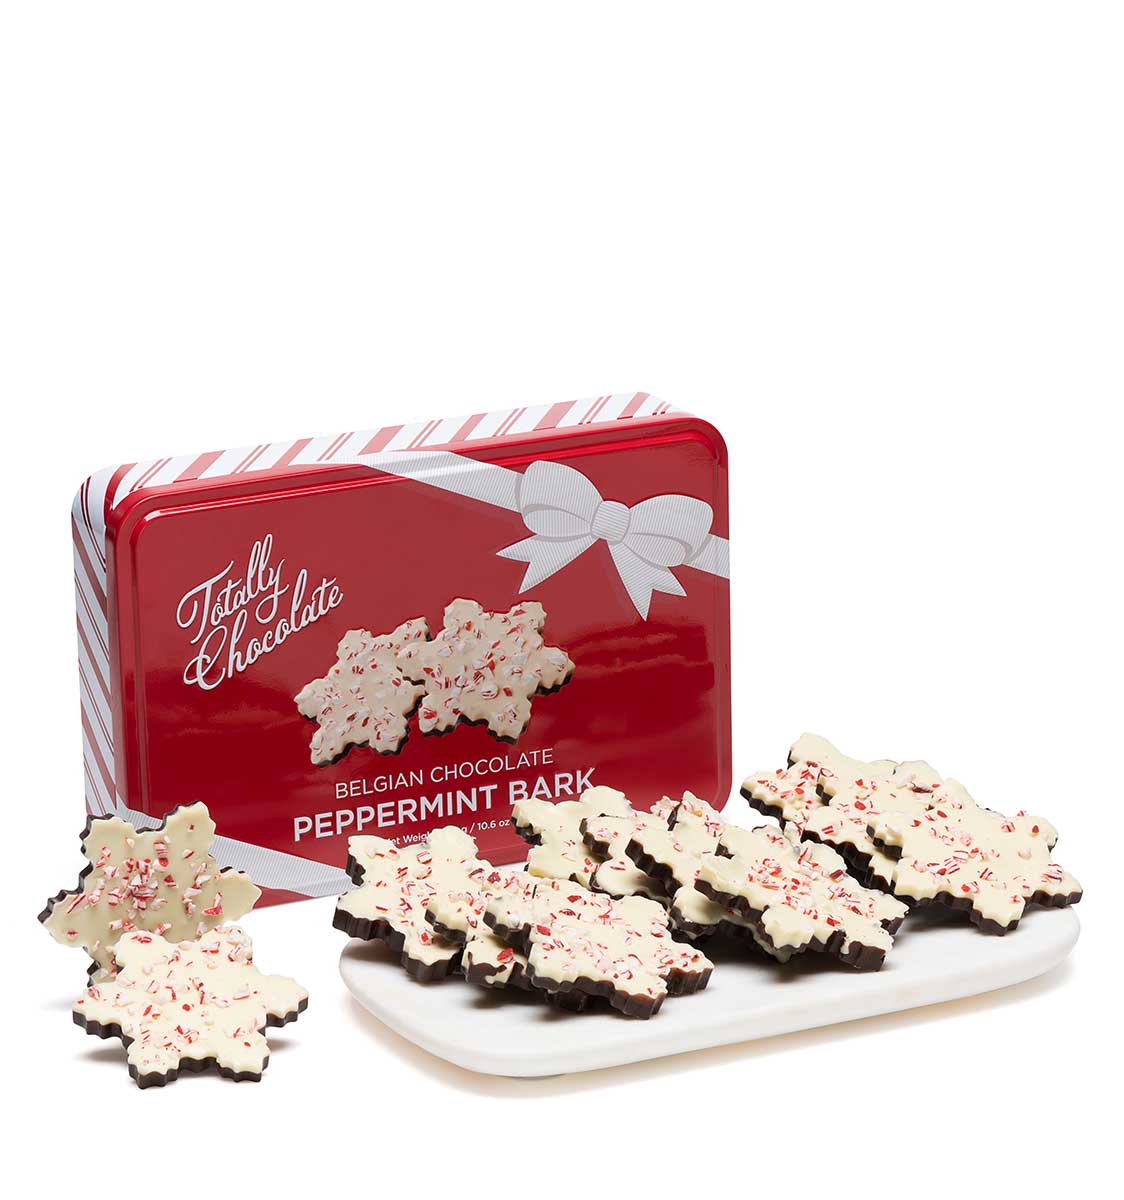 ready-gift-chocolate-SHX250014T-peppermint-bark-12-piece-snowflake-set-holiday-tin-1